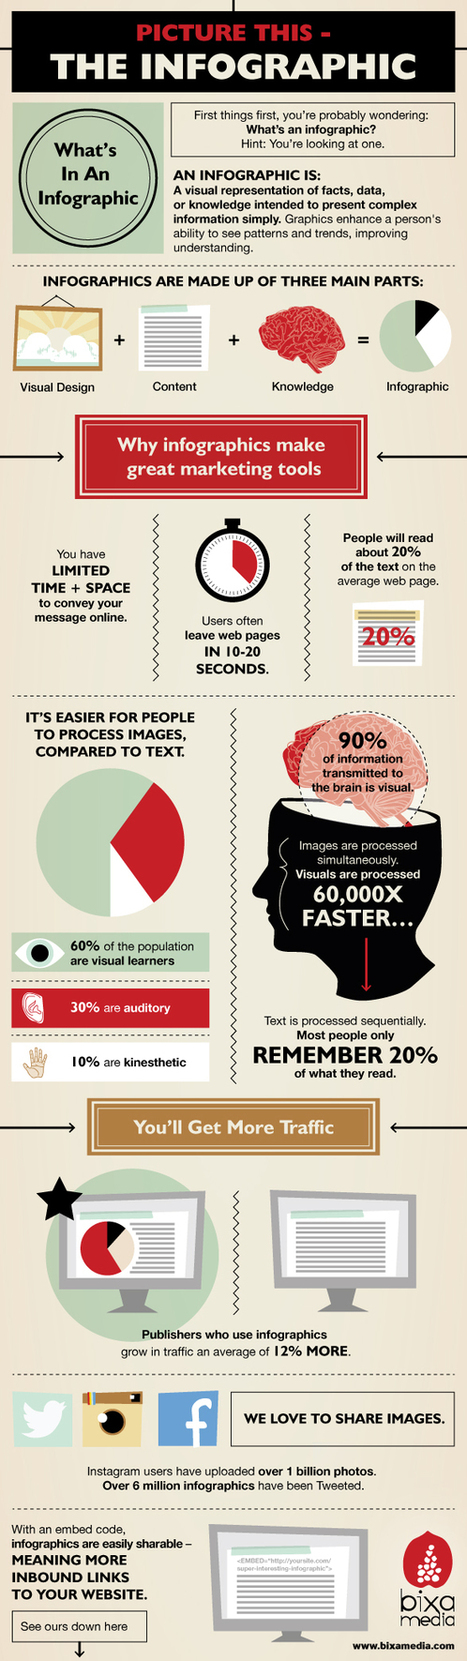 5 Reason Why Infographics Make Great Marketing Tools | digital marketing strategy | Scoop.it